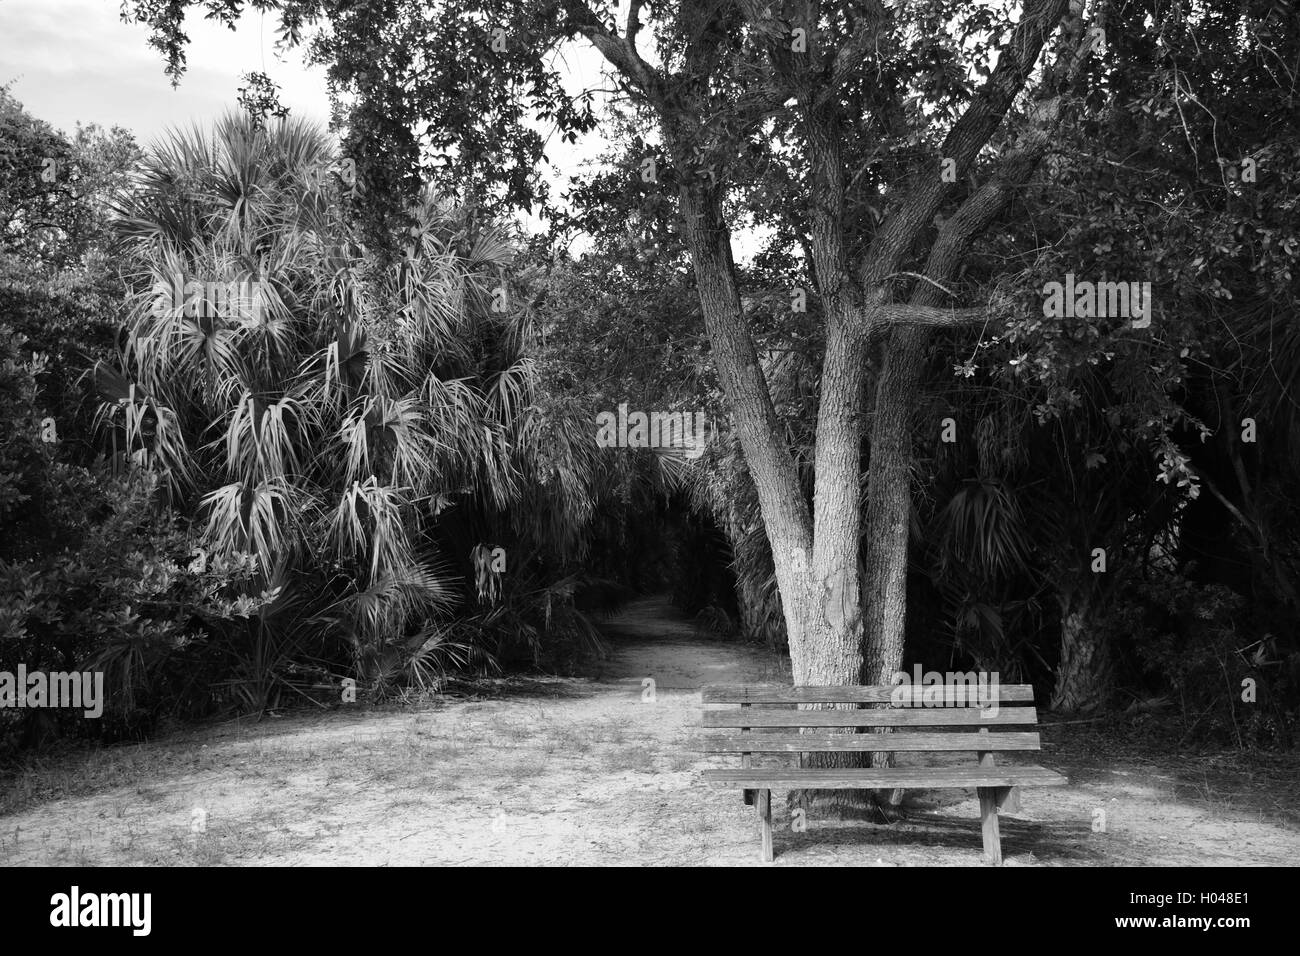 Park bench under a shade tree in front of trail entrance. Stock Photo